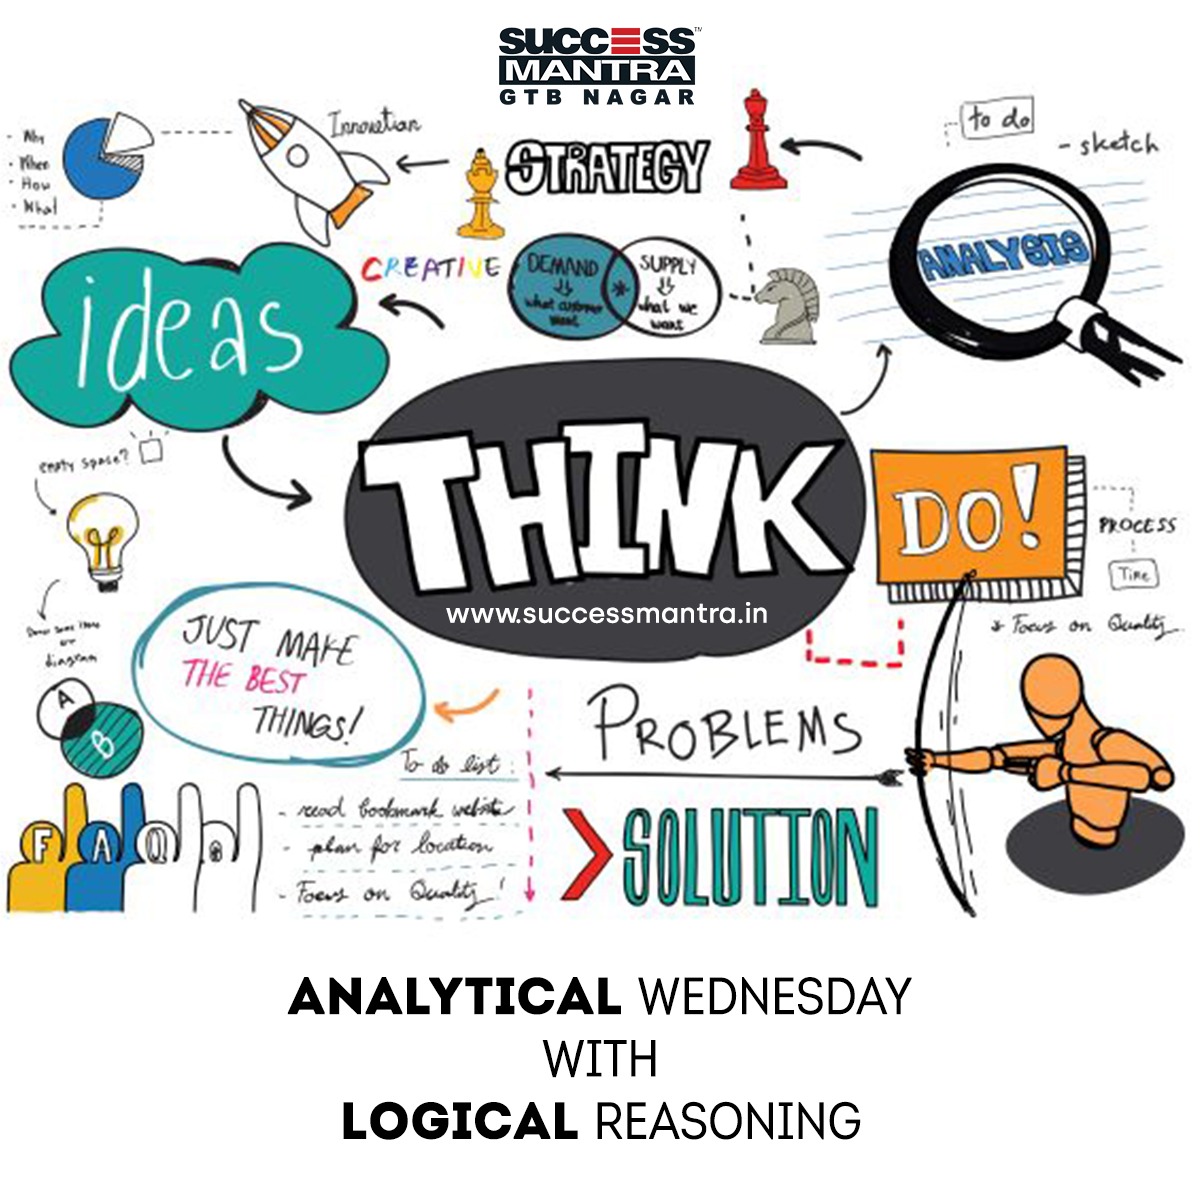 Questions on Logical Reasoning SMLRQ027